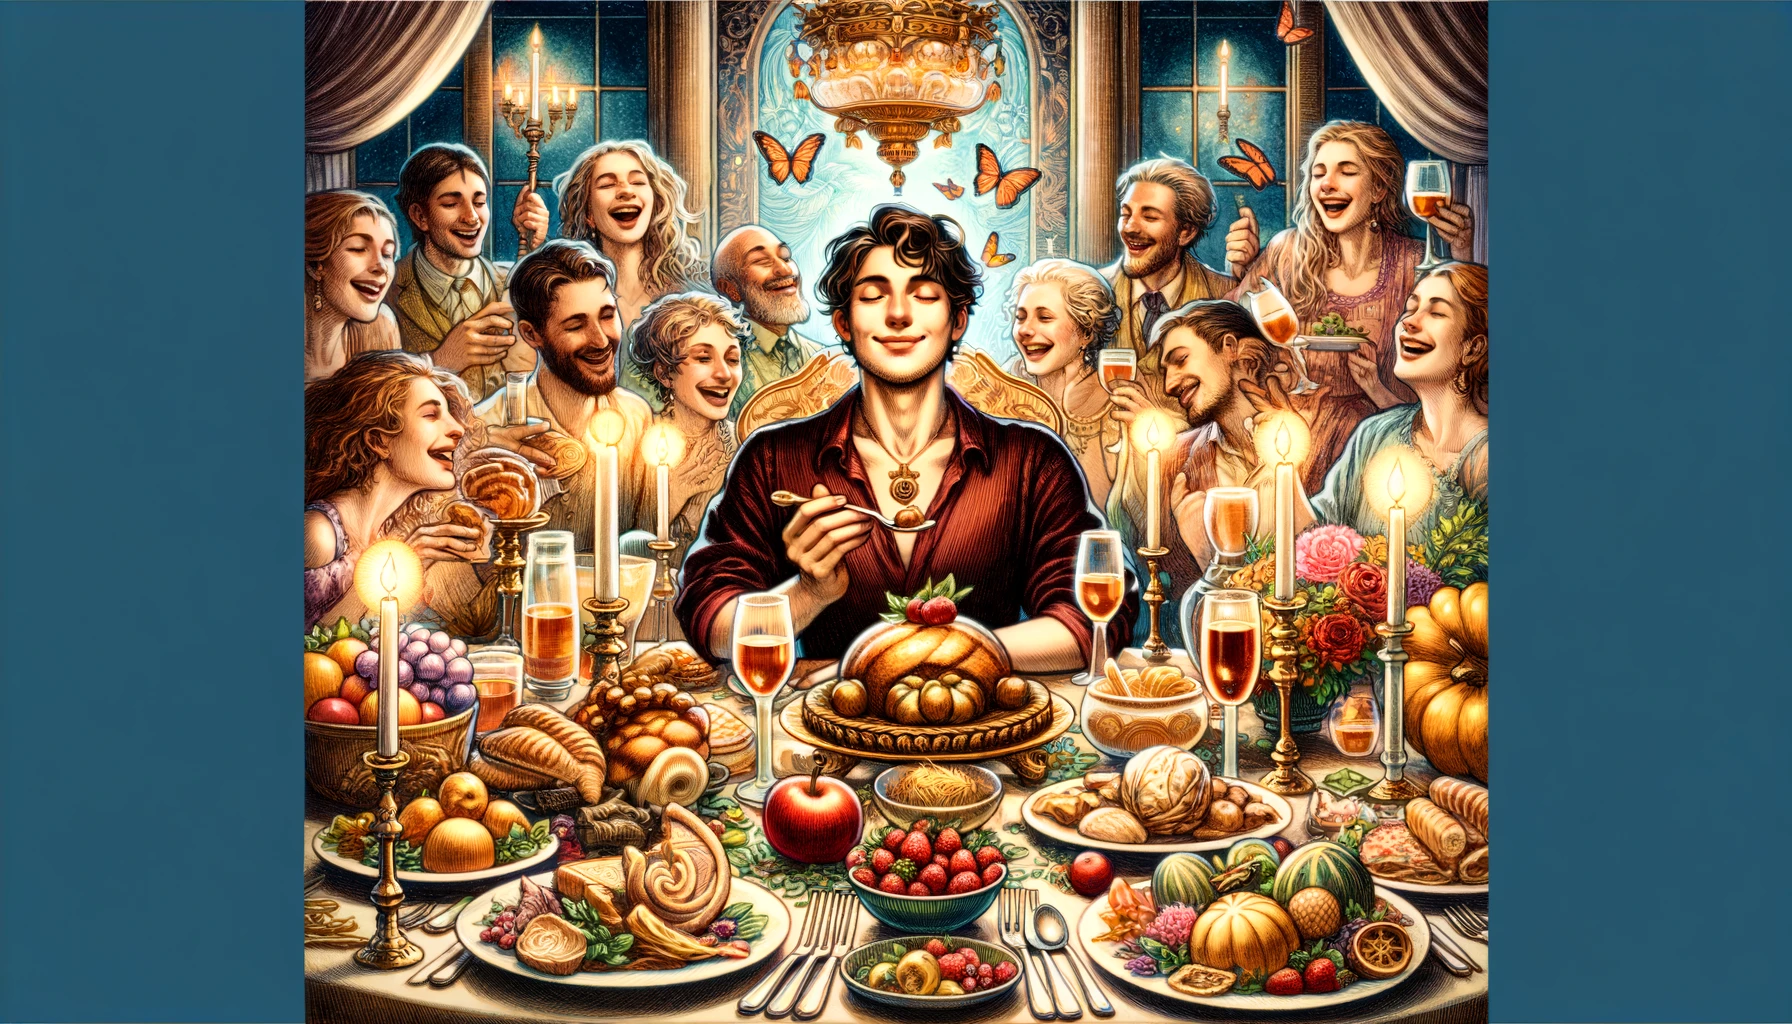 An image of a person sitting at a table adorned with a lavish spread of food and drink surrounded by joyful friends. The table is richly set with an